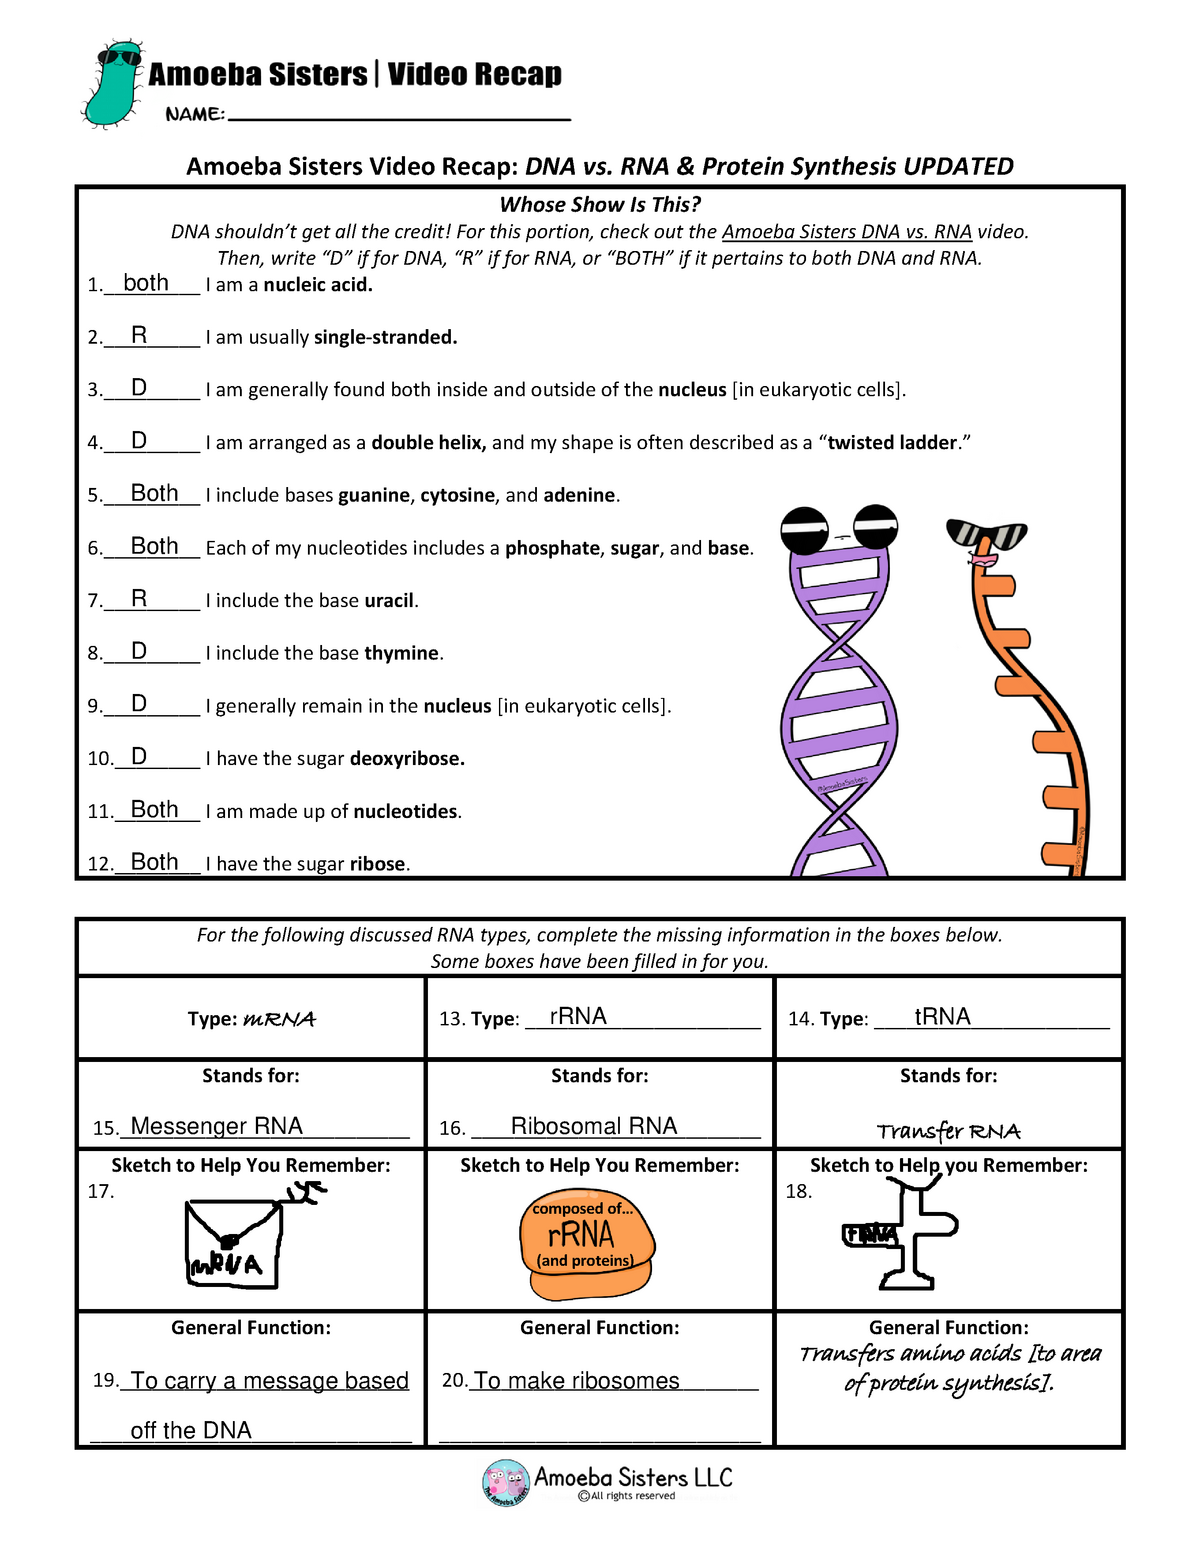 Dna vs rna and protein synthesis updated recap by amoeba sisters With Dna And Rna Worksheet Answers